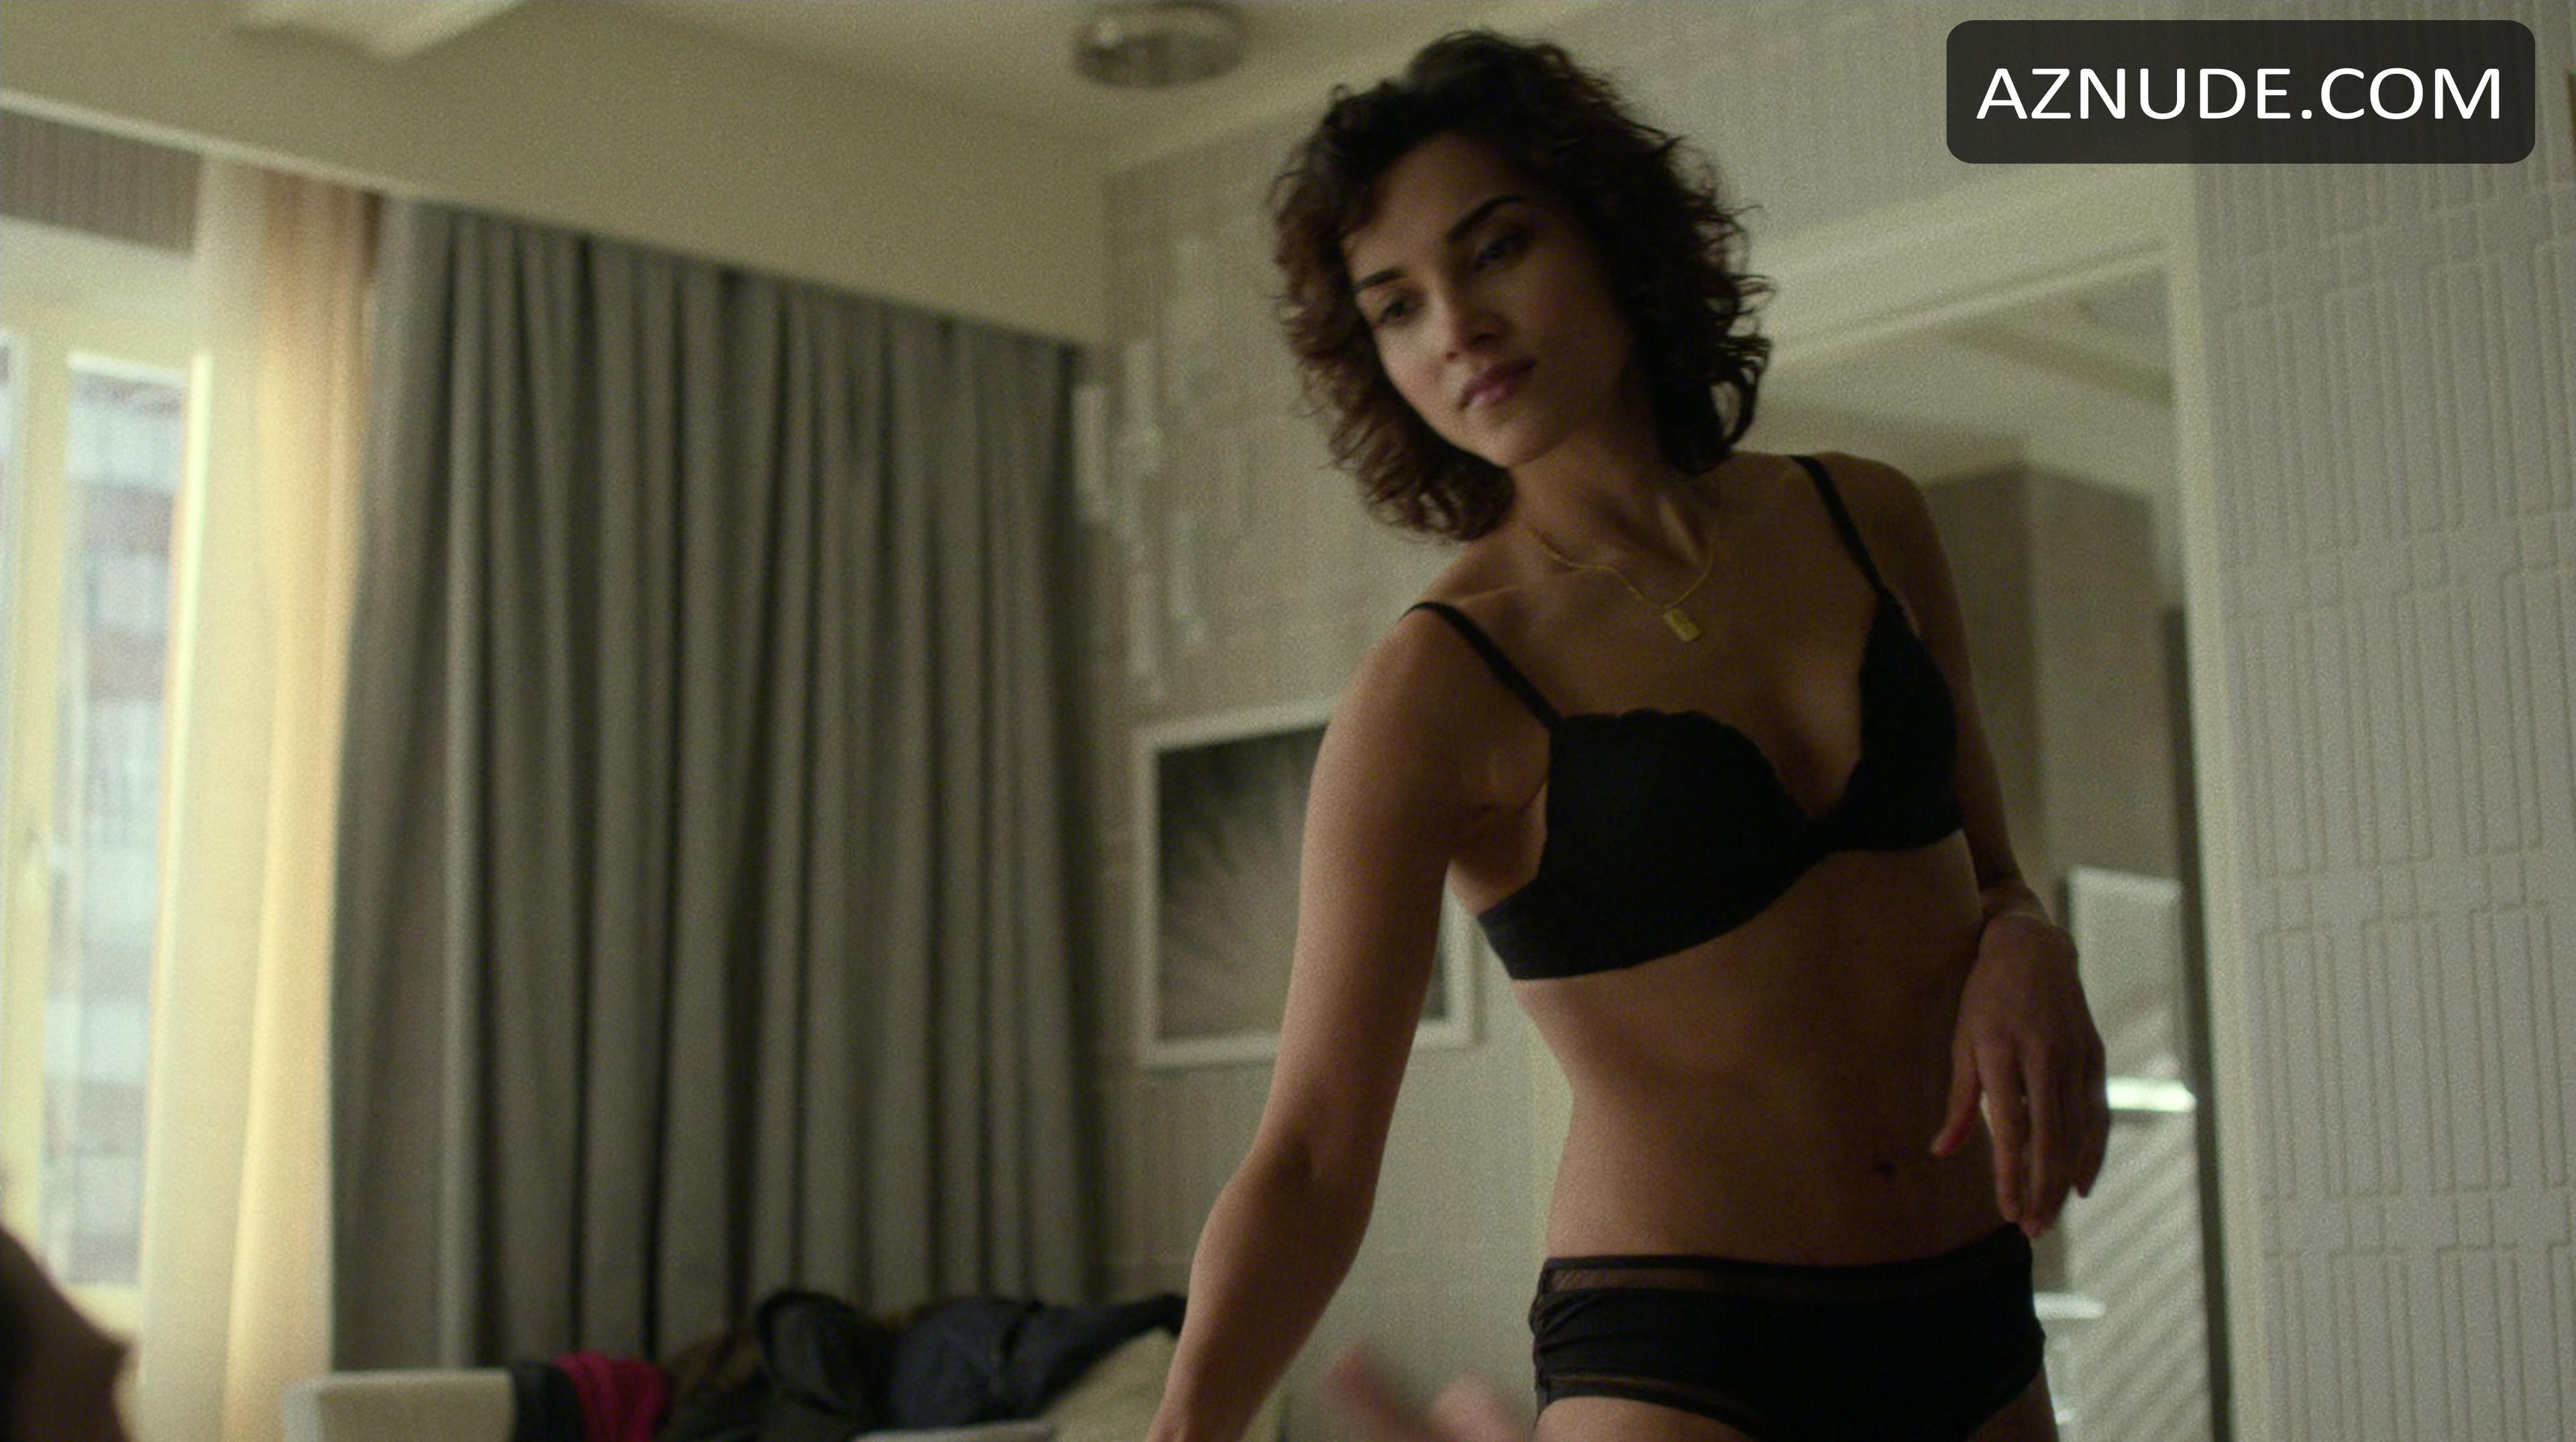 alexandrea turney recommends amber rose revah sex pic